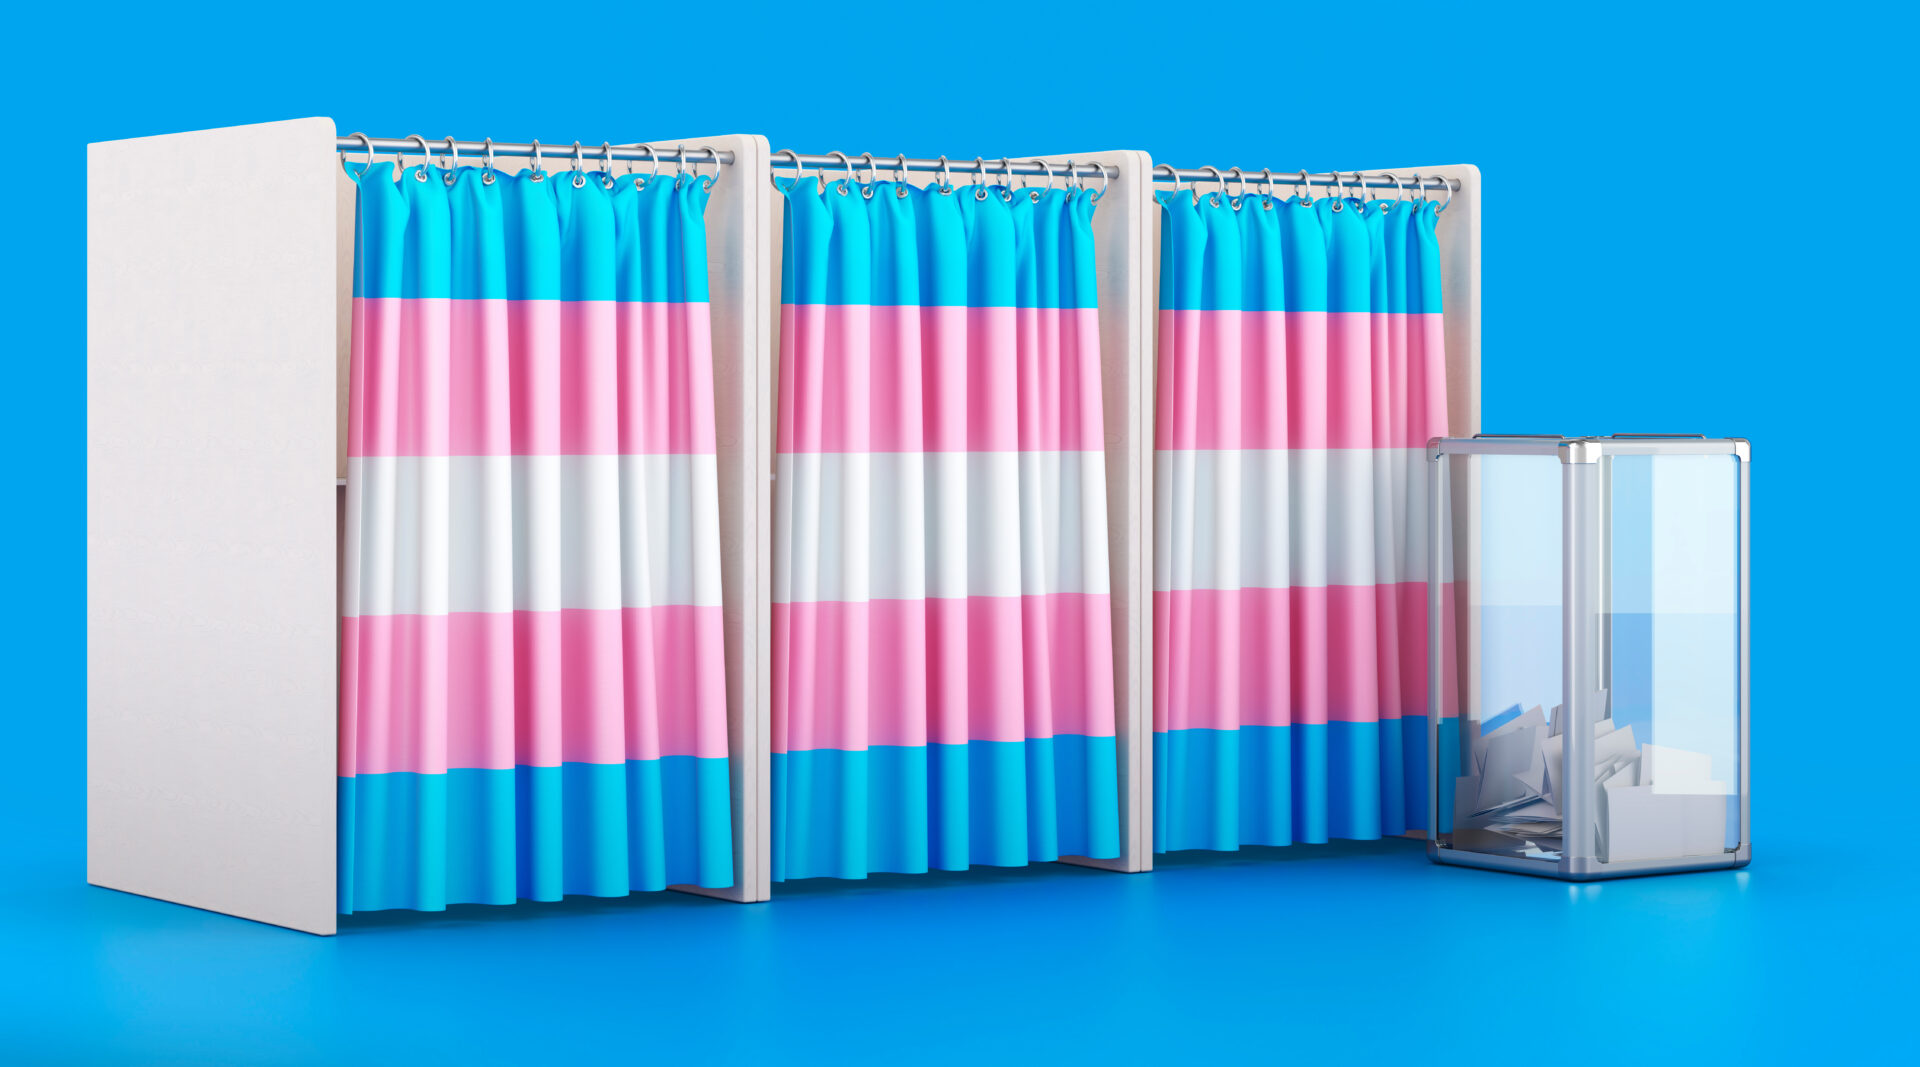 Voting booths with transgender flag and ballot box. A 3D rendering. The transgender flag is blue, pink and white.